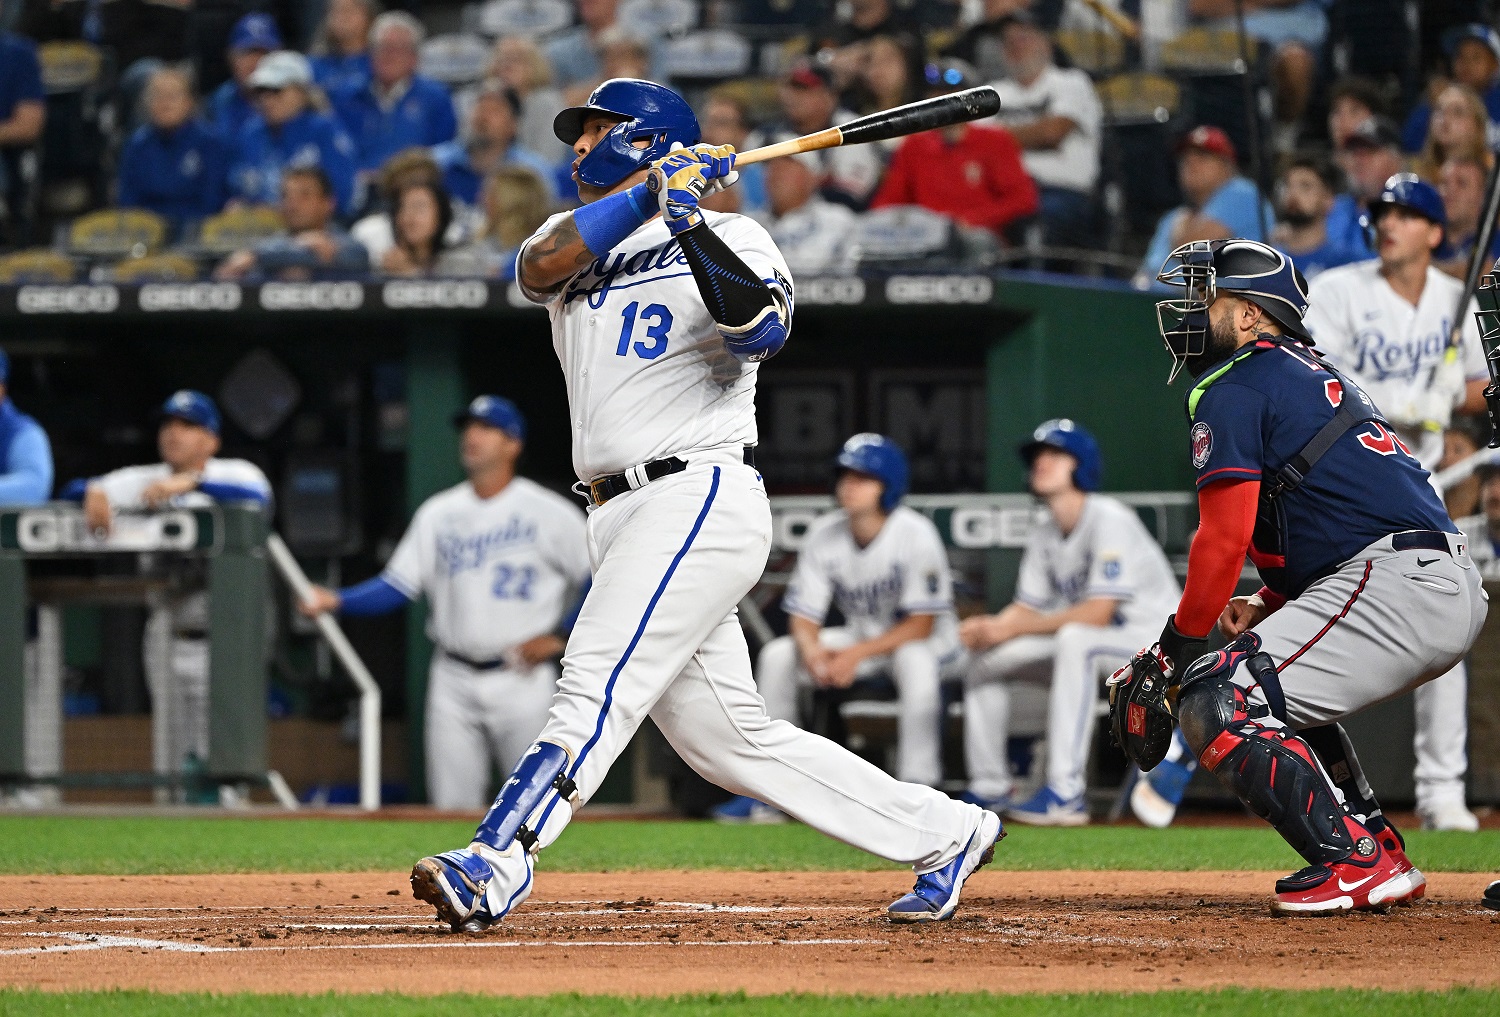 Salvador Perez powers Royals to 10-3 victory over Tigers